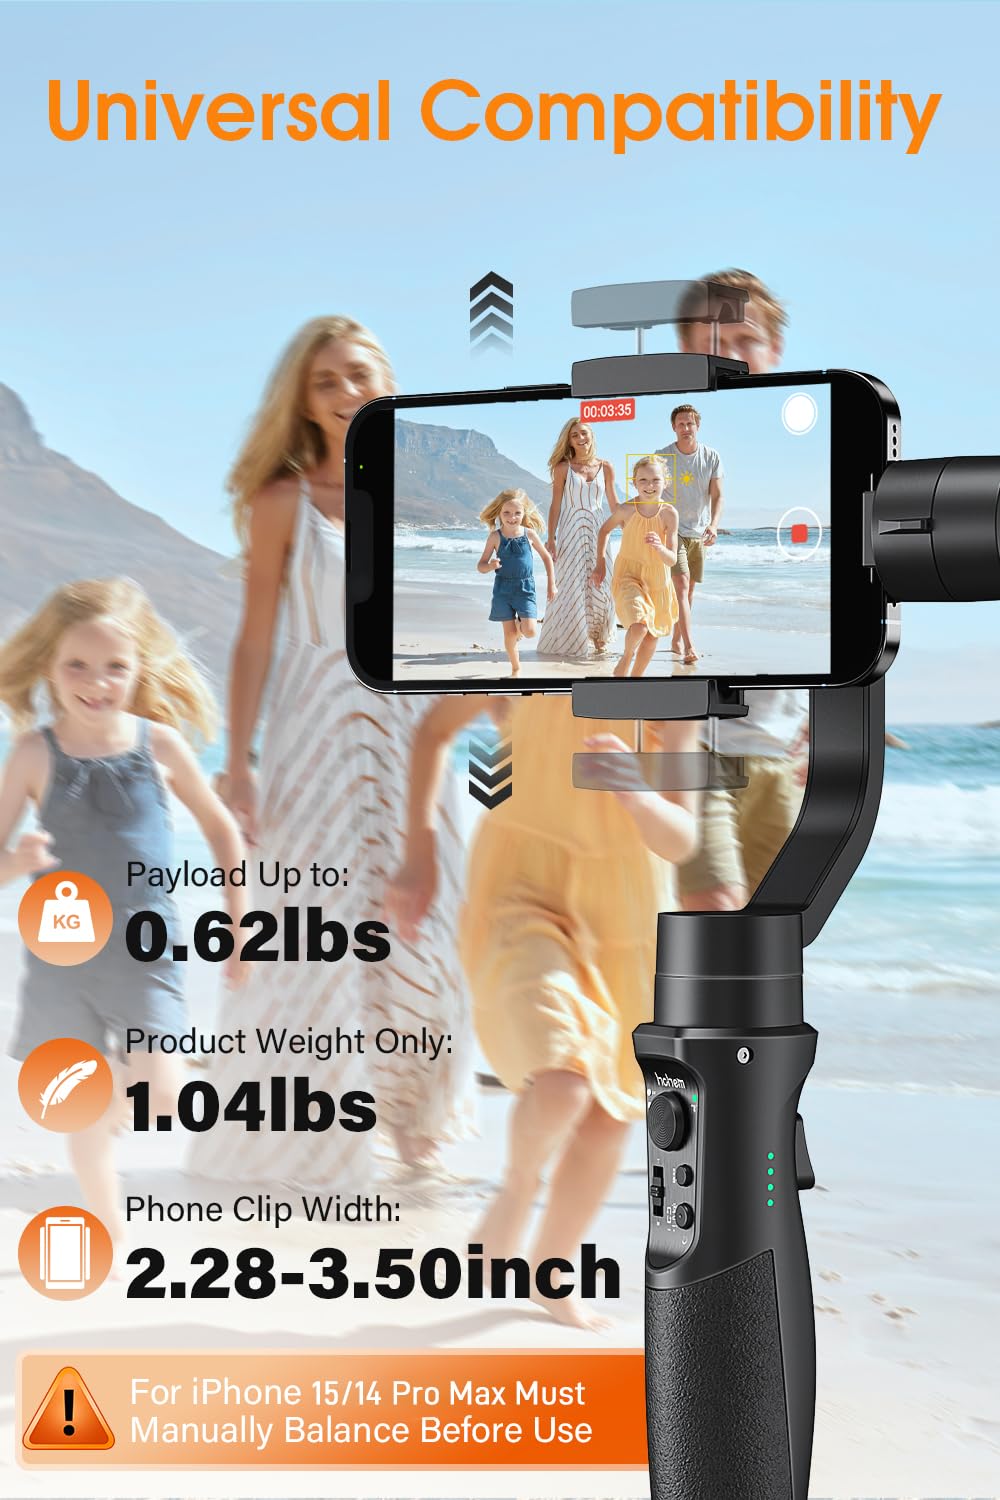 Gimbal Stabilizer for Smartphone, 3-Axis Phone Gimbal for Android and iPhone 15,14,13,12 PRO, Stabilizer for Video Recording with Face/Object Tracking, 600 °Auto Rotation - hohem iSteady Mobile Plus